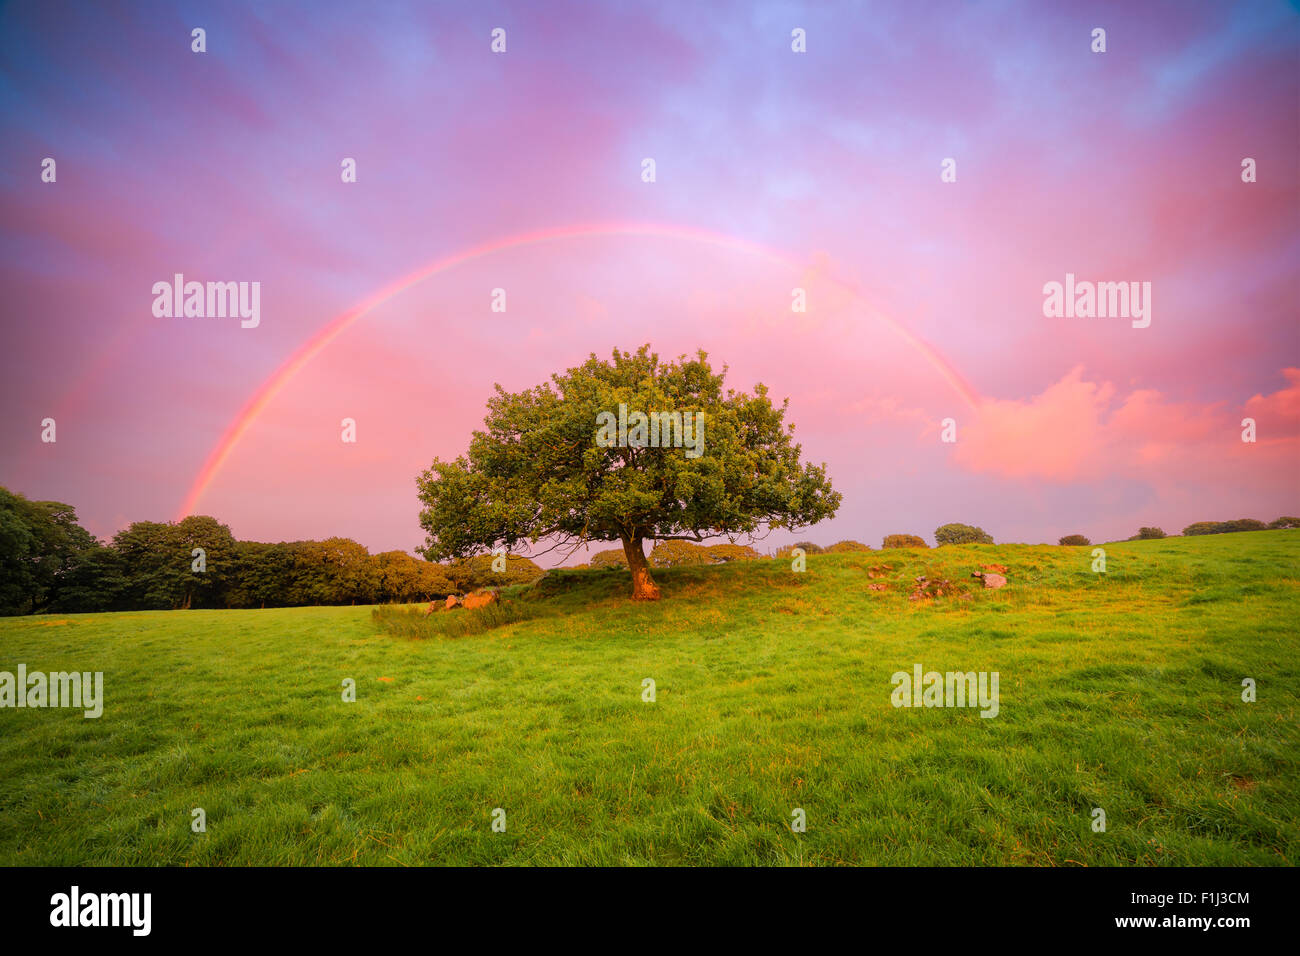 A dramatic sunset rainbow over a tree in the Preseli Hills, Wales. Stock Photo